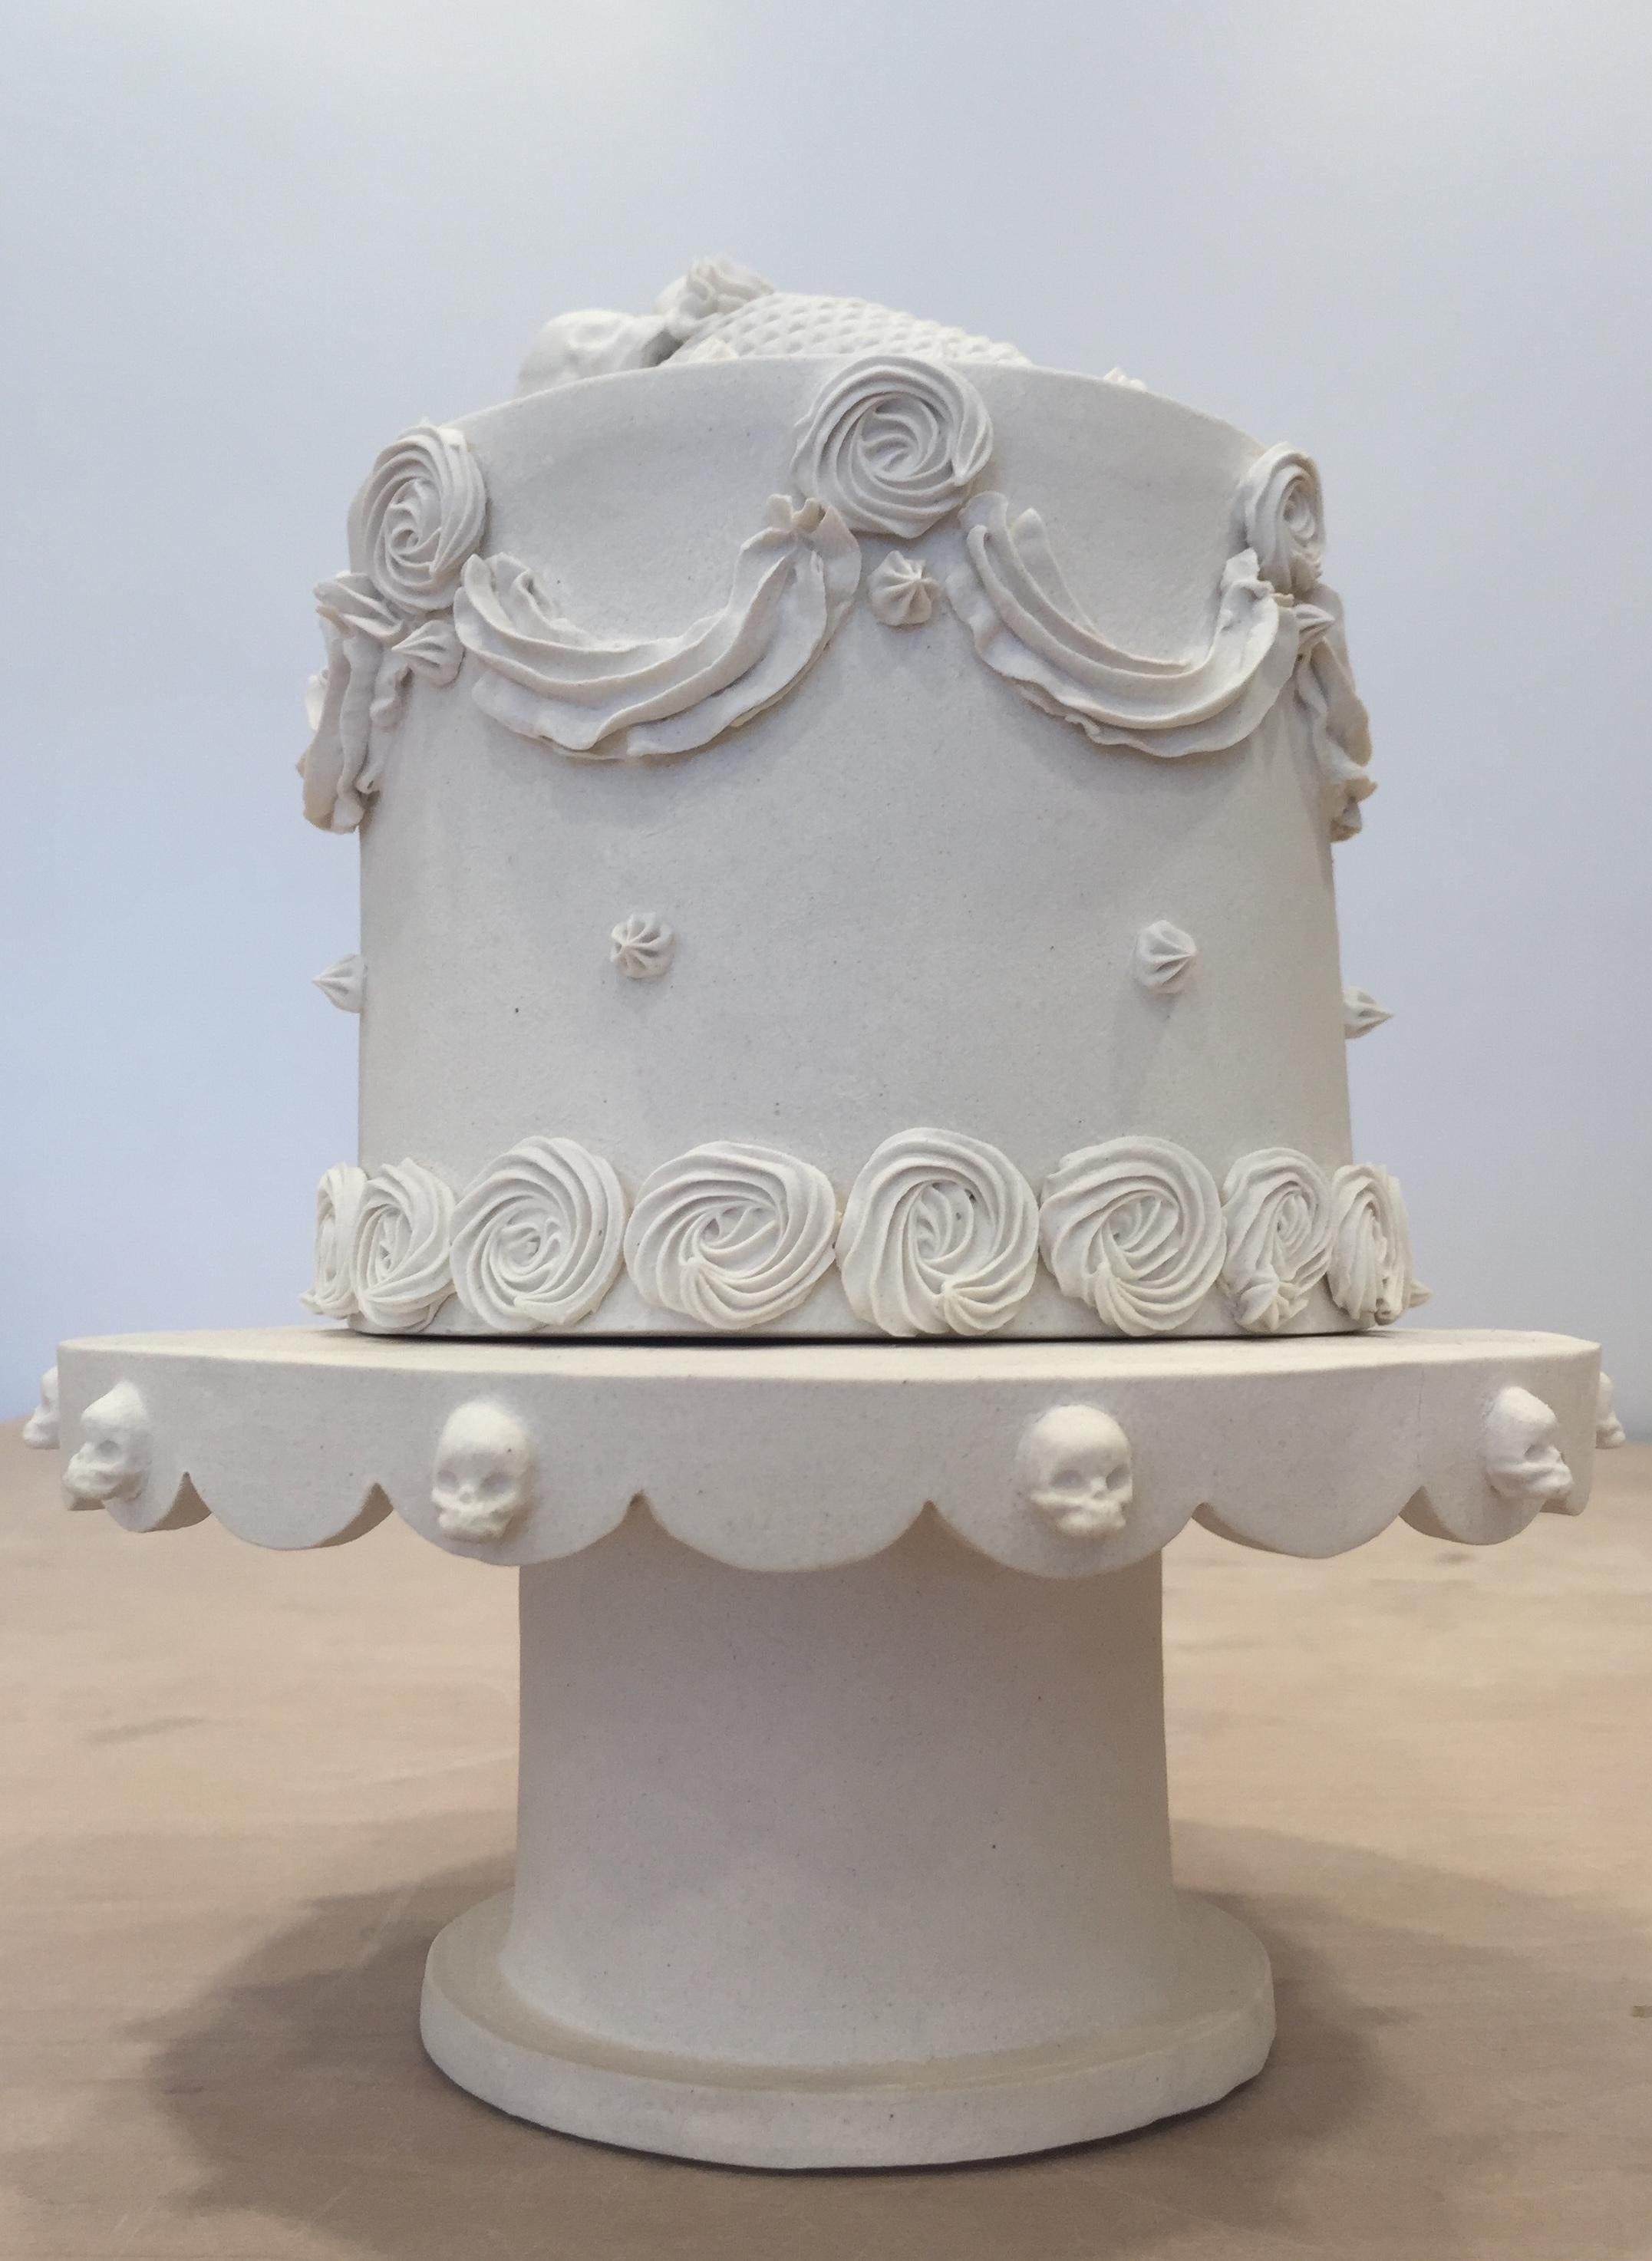 Small cake with a stand - Gray Figurative Sculpture by Jacqueline Tse